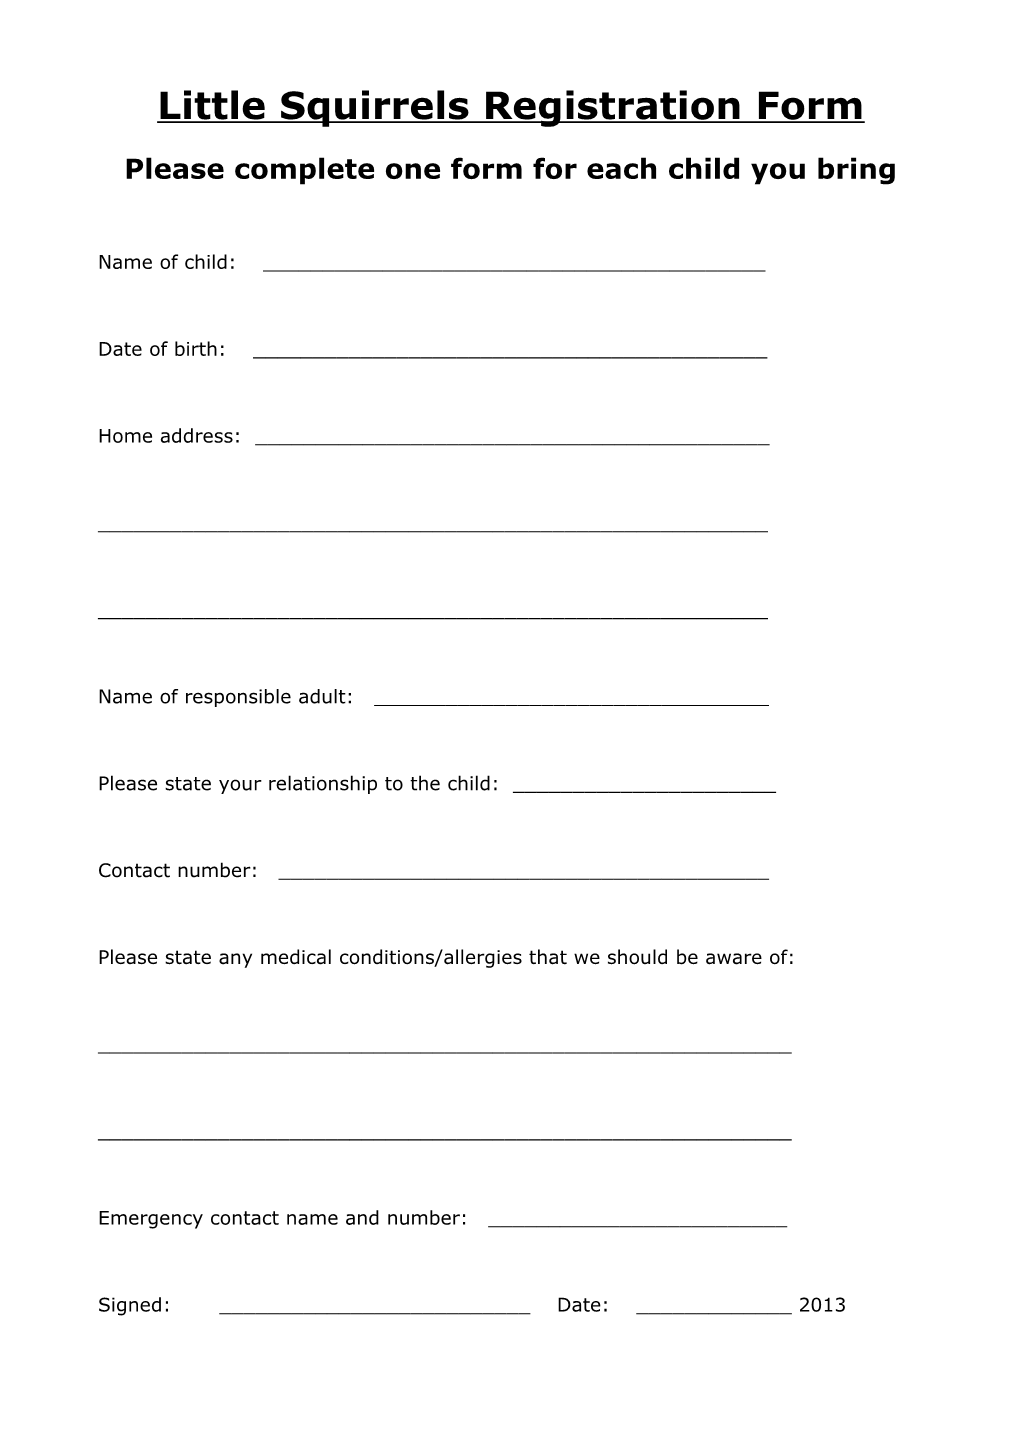 Please Complete One Form for Each Child You Bring